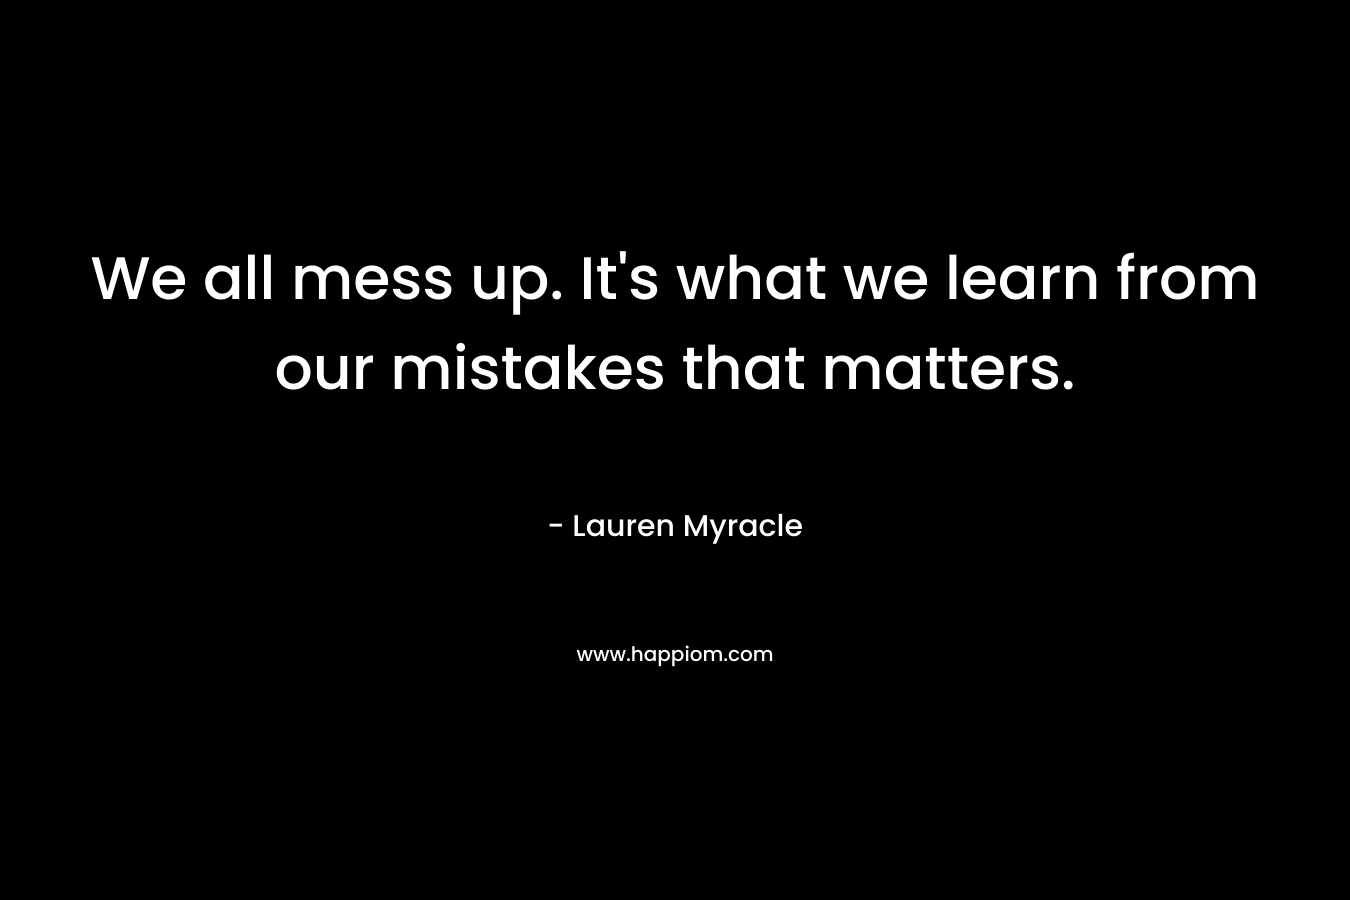 We all mess up. It's what we learn from our mistakes that matters.